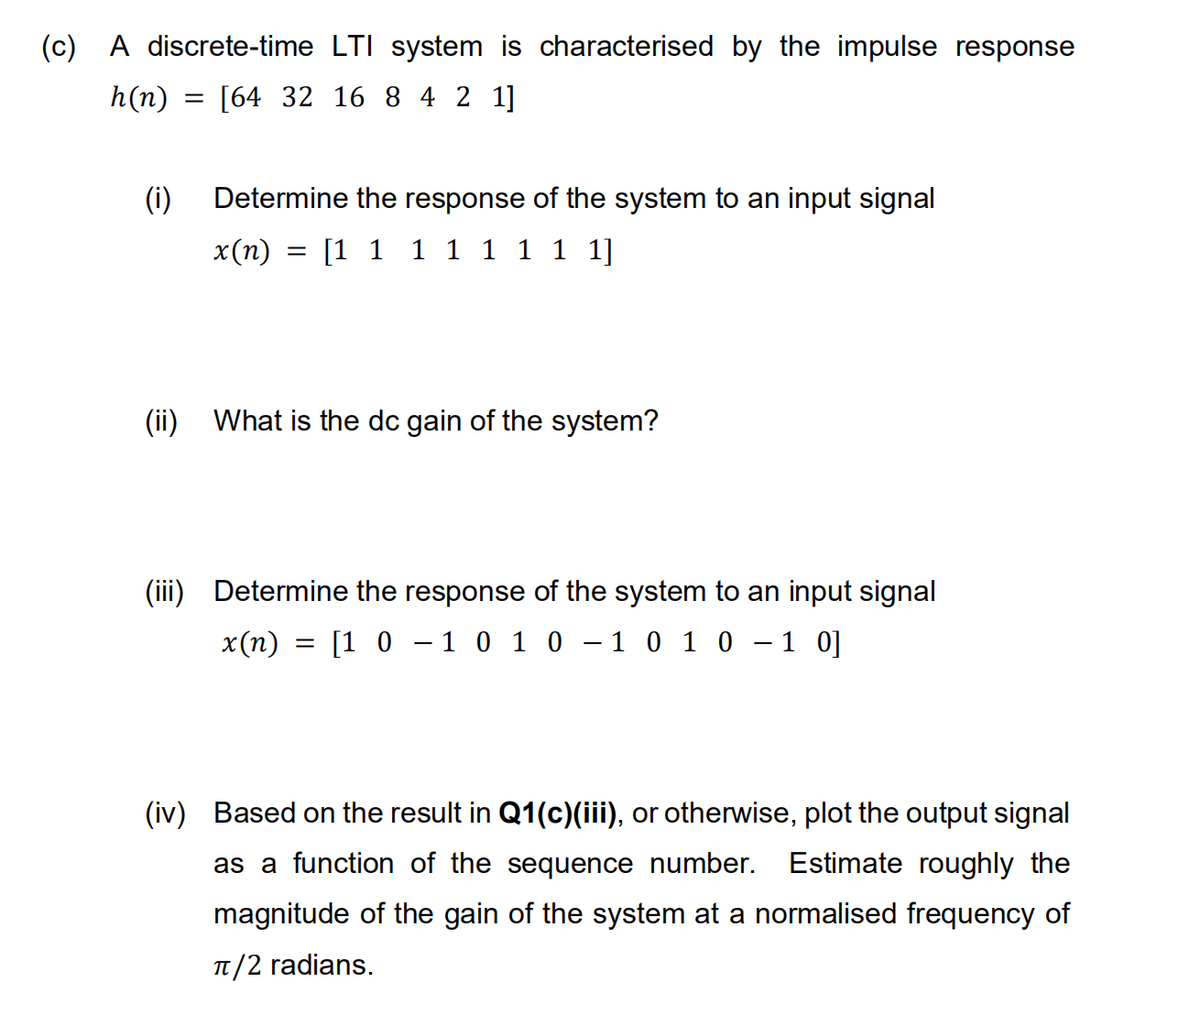 (c) A discrete-time LTI system is characterised by the impulse response
h(n)
[64 32 16 8 4 2 1]
(i)
Determine the response of the system to an input signal
x(n) = [1 1 1 1 1 1 1 1]
(ii)
What is the dc gain of the system?
(iii) Determine the response of the system to an input signal
x (п)
[1 0 - 1 0 1 0 - 1 0 1 0
- 1 0]
(iv) Based on the result in Q1(c)(iii), or otherwise, plot the output signal
as a function
the sequence number. Estimate roughly the
magnitude of the gain of the system at a normalised frequency of
T/2 radians.
